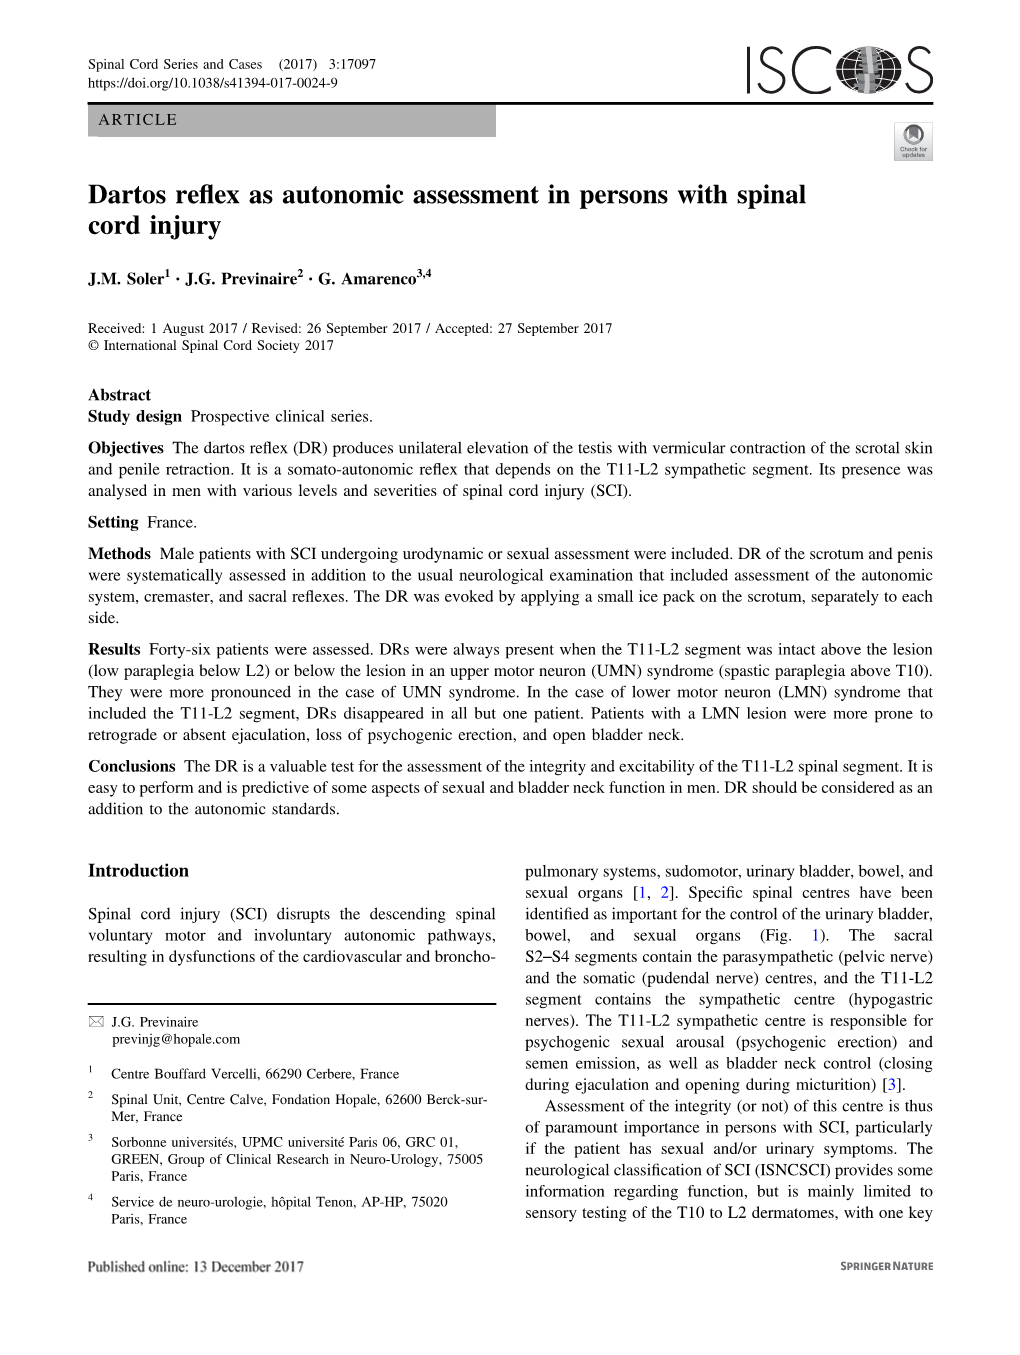 Dartos Reflex As Autonomic Assessment in Persons with Spinal